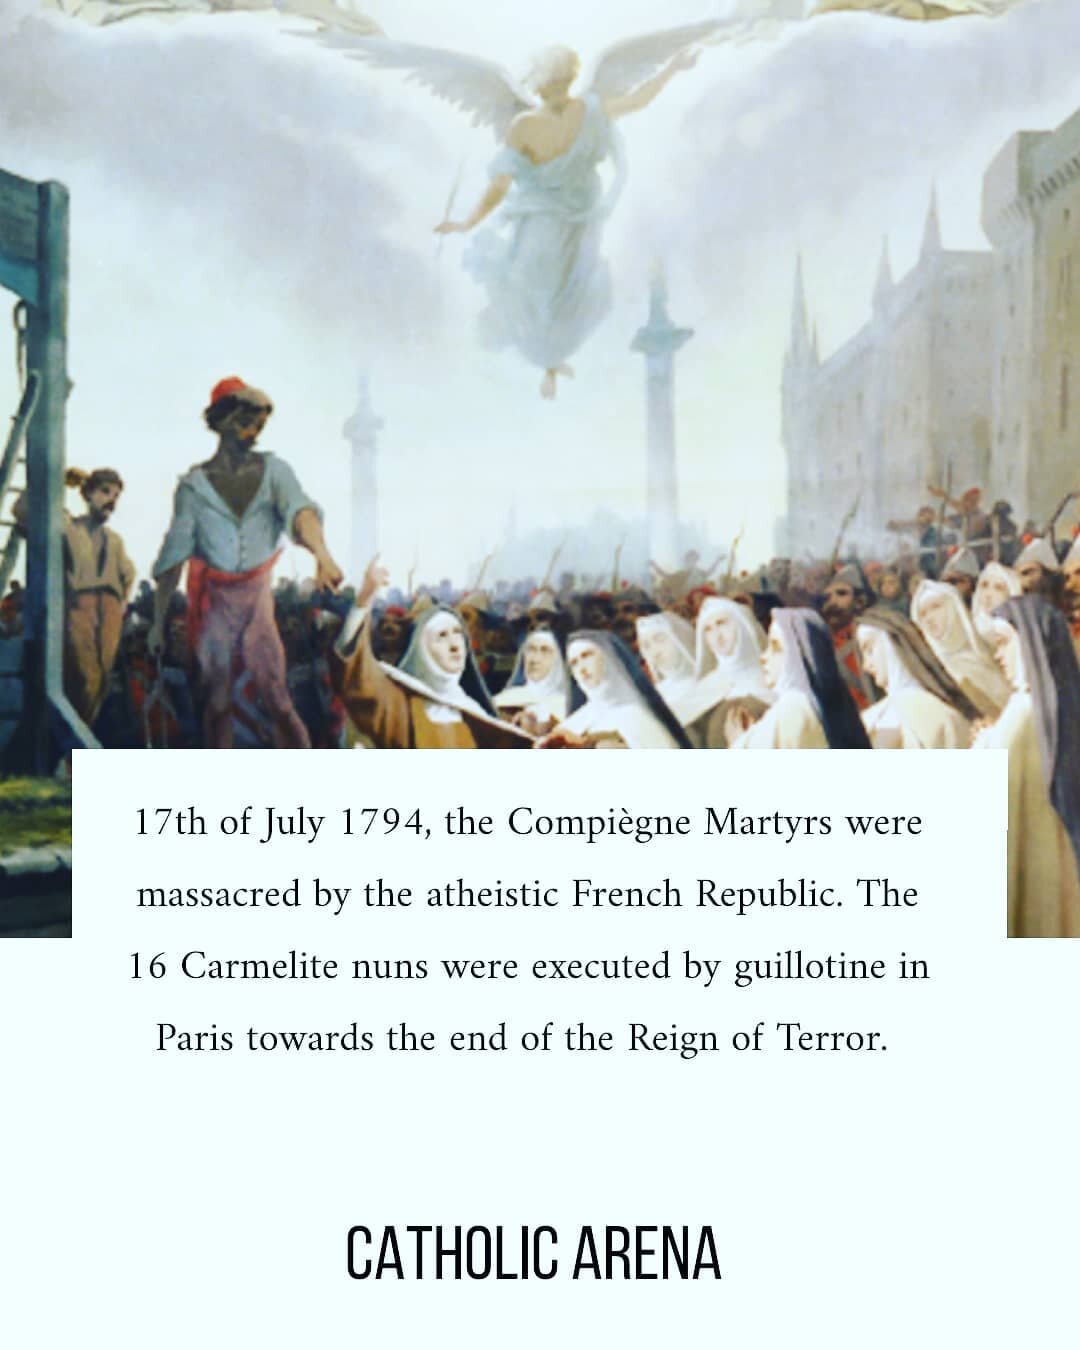 17th of July we commemorate the Compi&egrave;gne Martyrs who were murdered during the French Revolution. 

#catholic #jesus #christian #faith #church #france